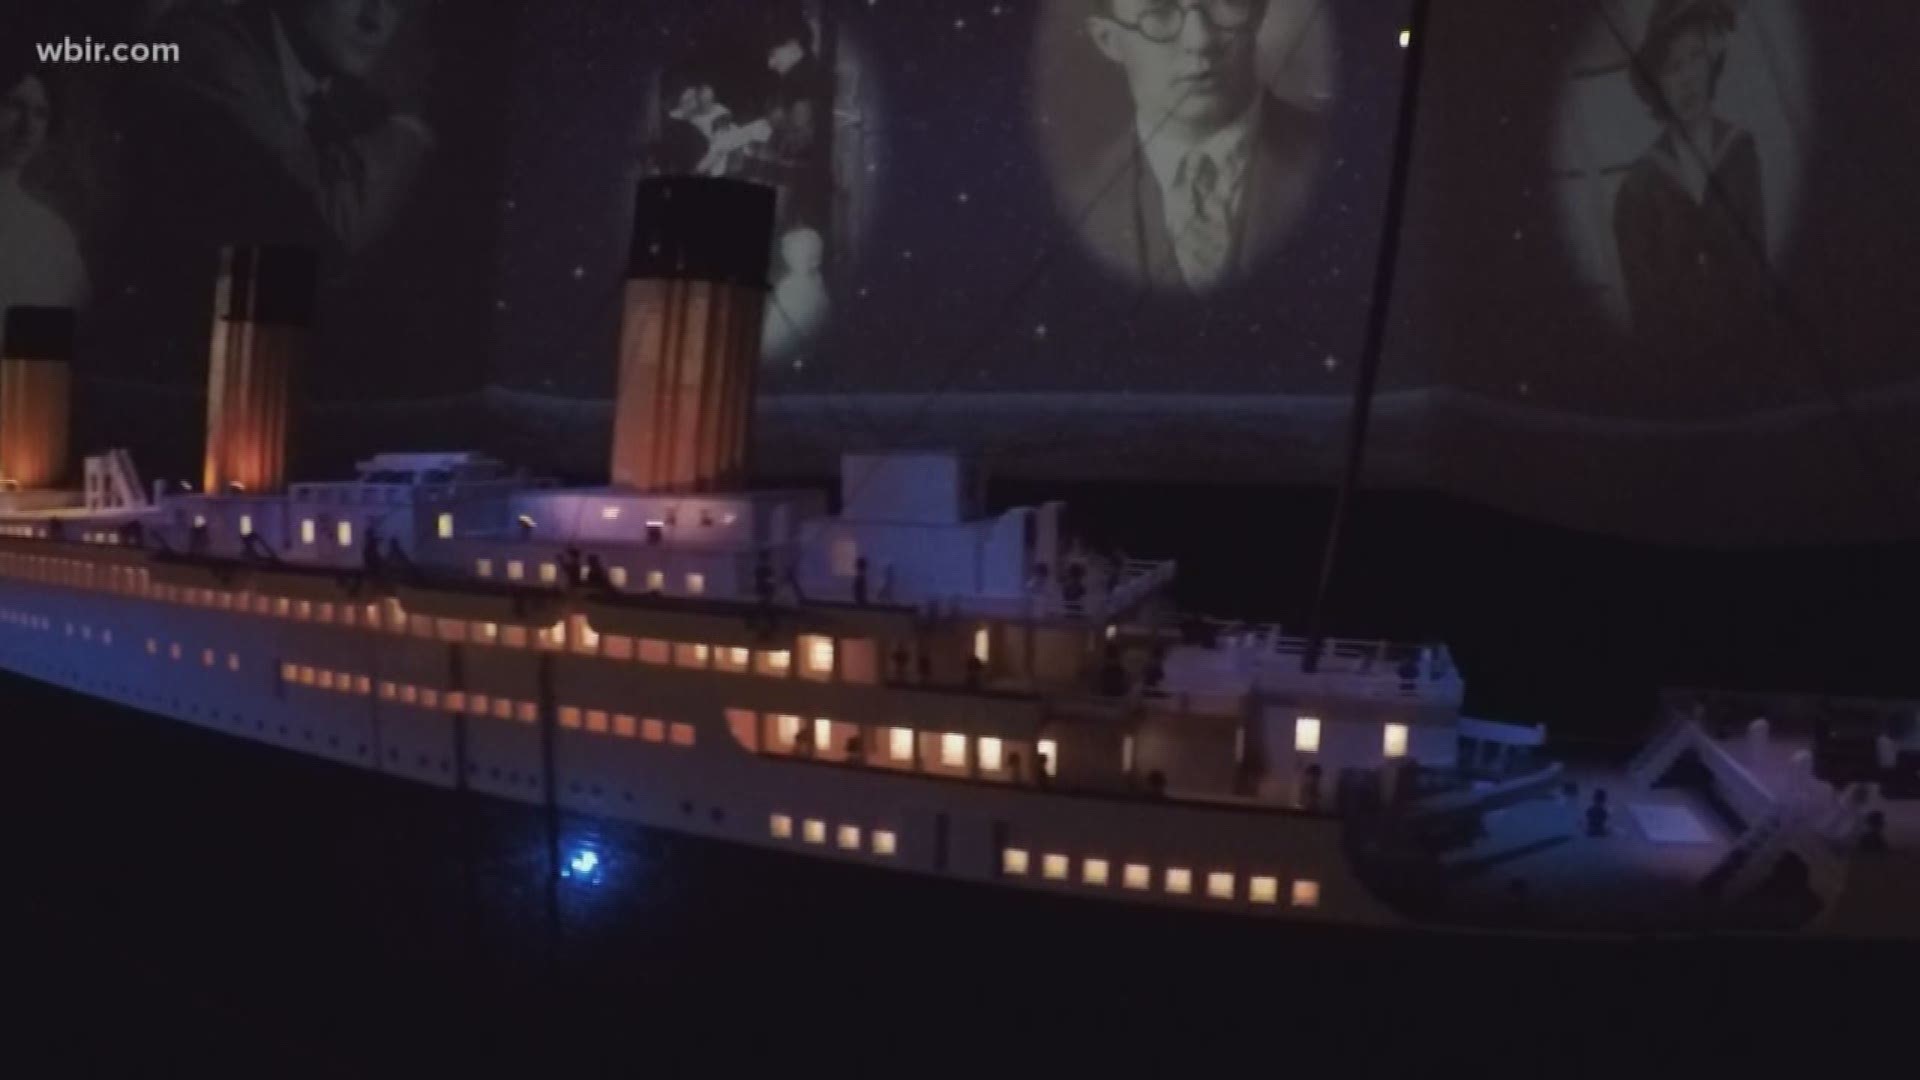 April 16, 2018: A 10-year-old boy had a dream involving Legos and the Titanic. It brought him from Iceland to East Tennessee.